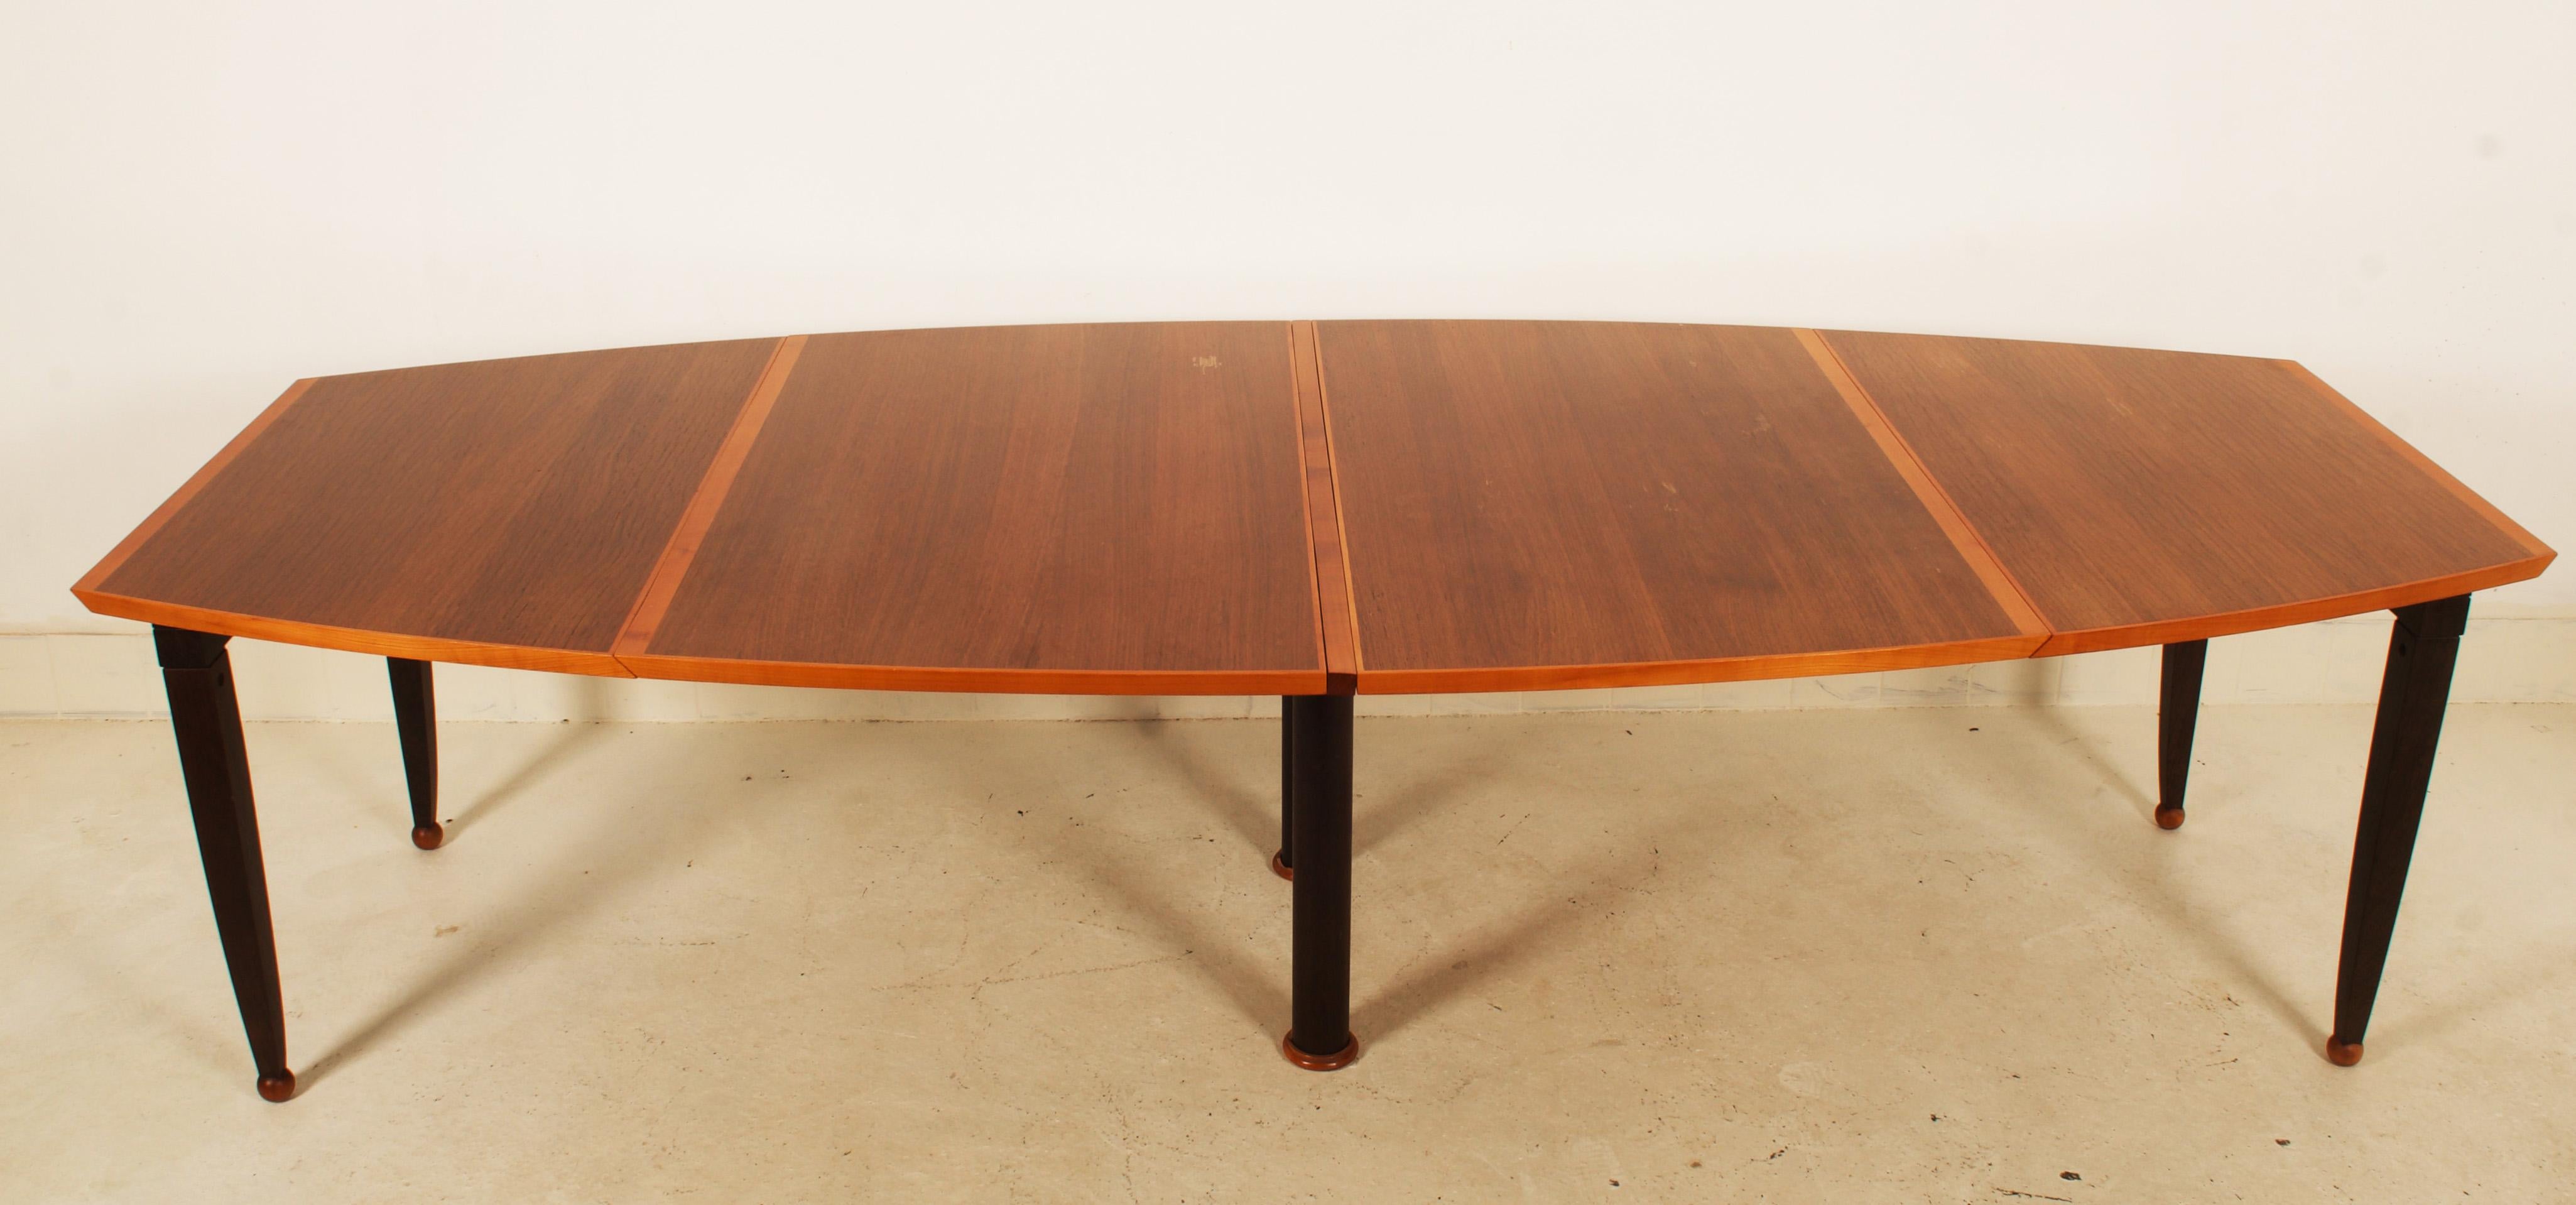 Tabula Magna Dining Table by Oscar Tosquets Blanca for Driade Aleph  For Sale 11